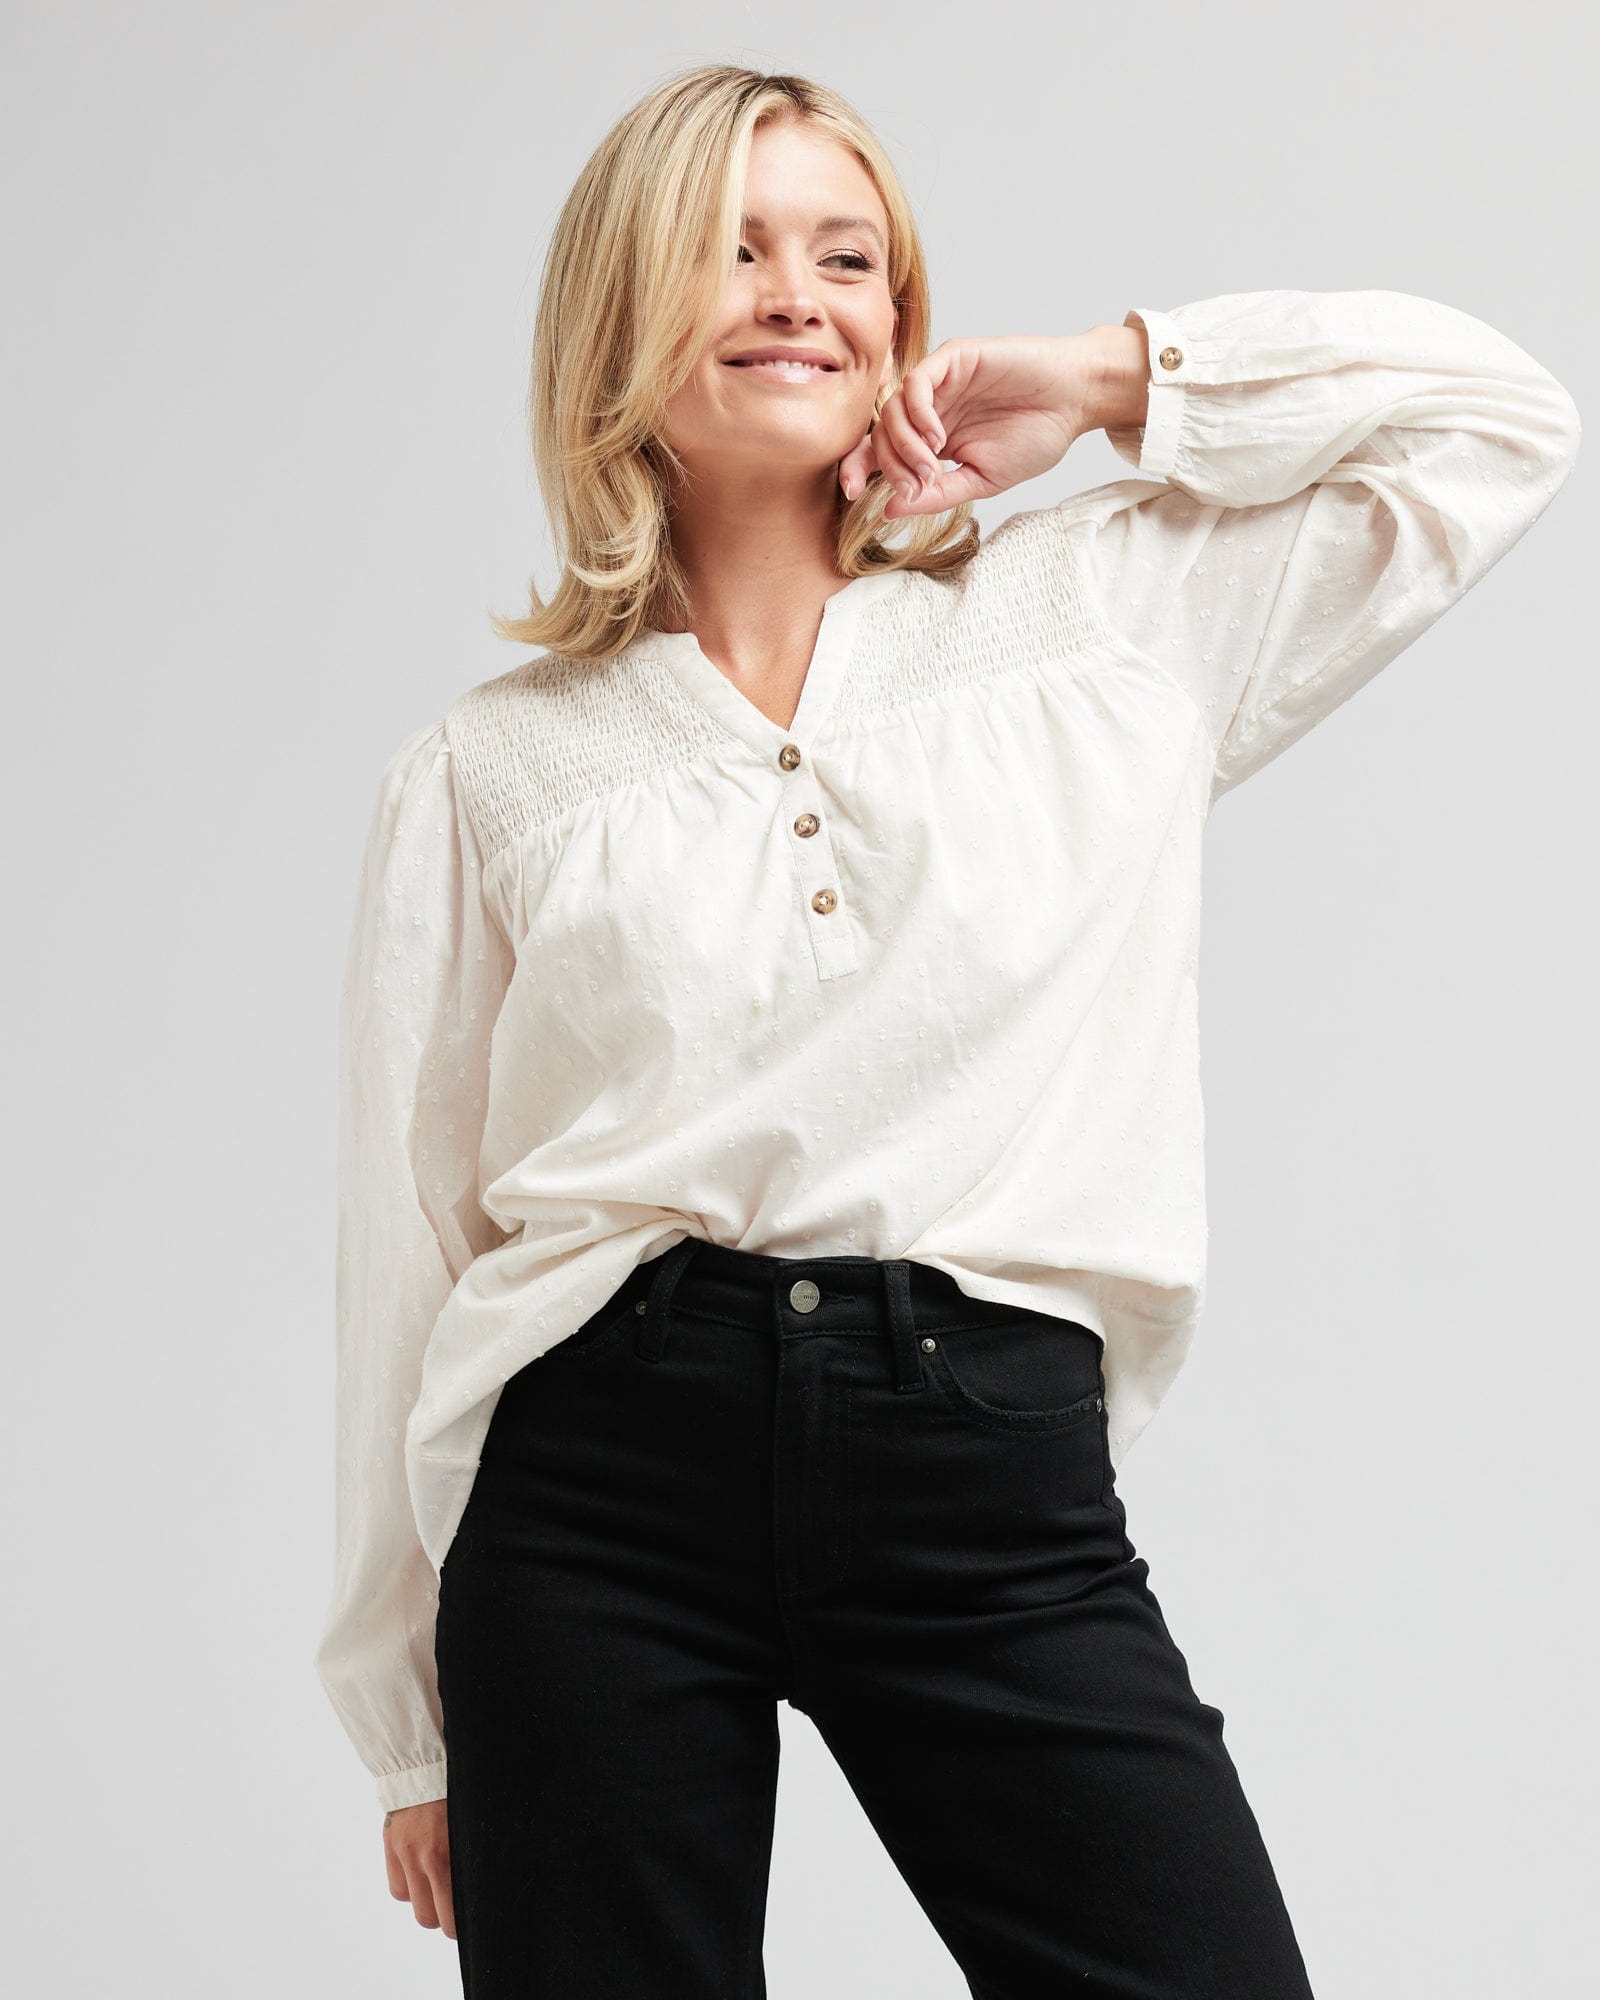 Woman in a long sleeve, v-neck, white blouse